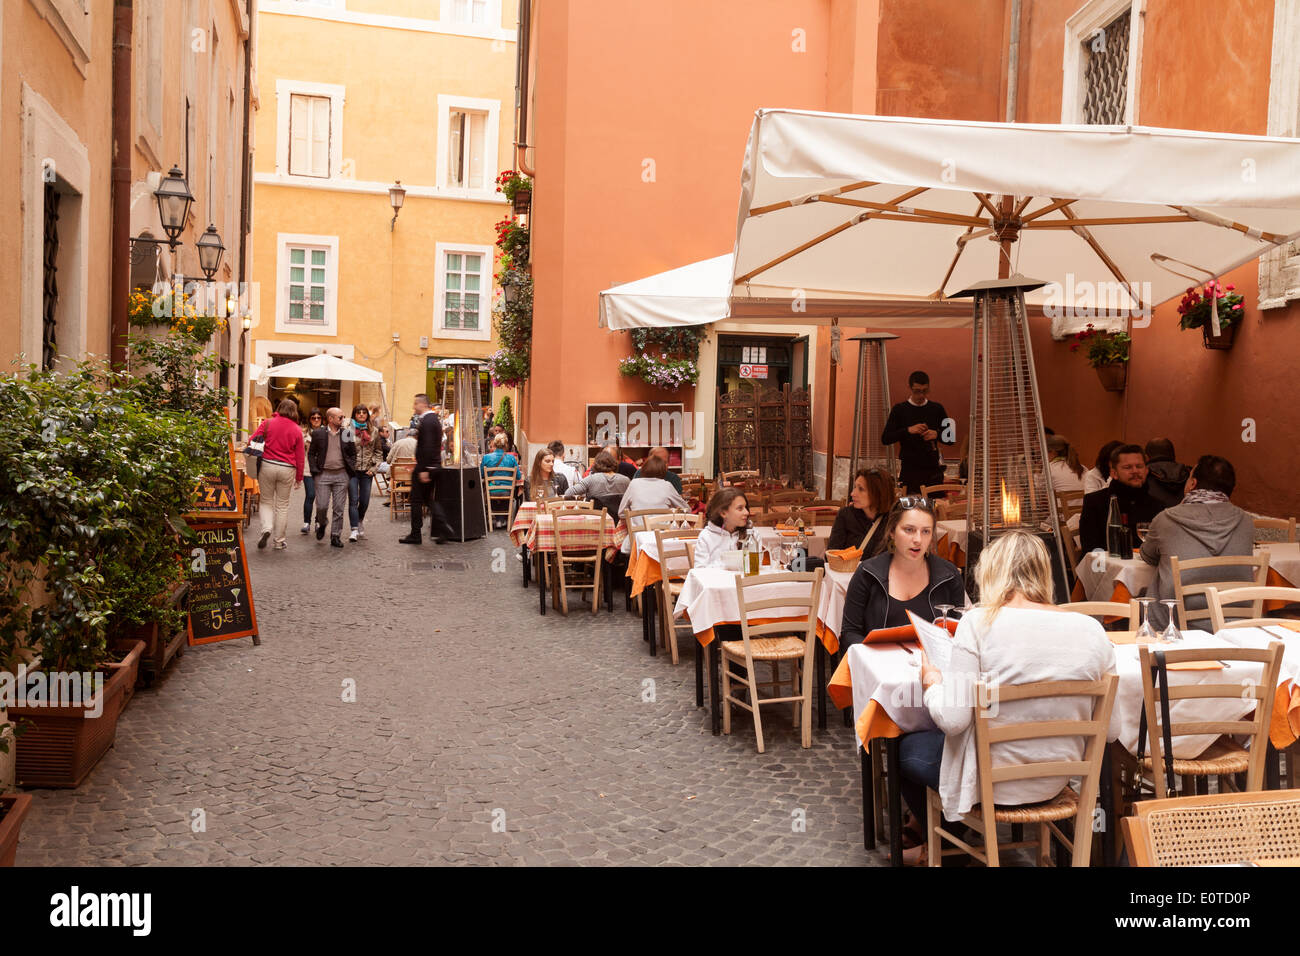 People drinking and eating outdoors at a street cafe, Rome Italy Europe Stock Photo